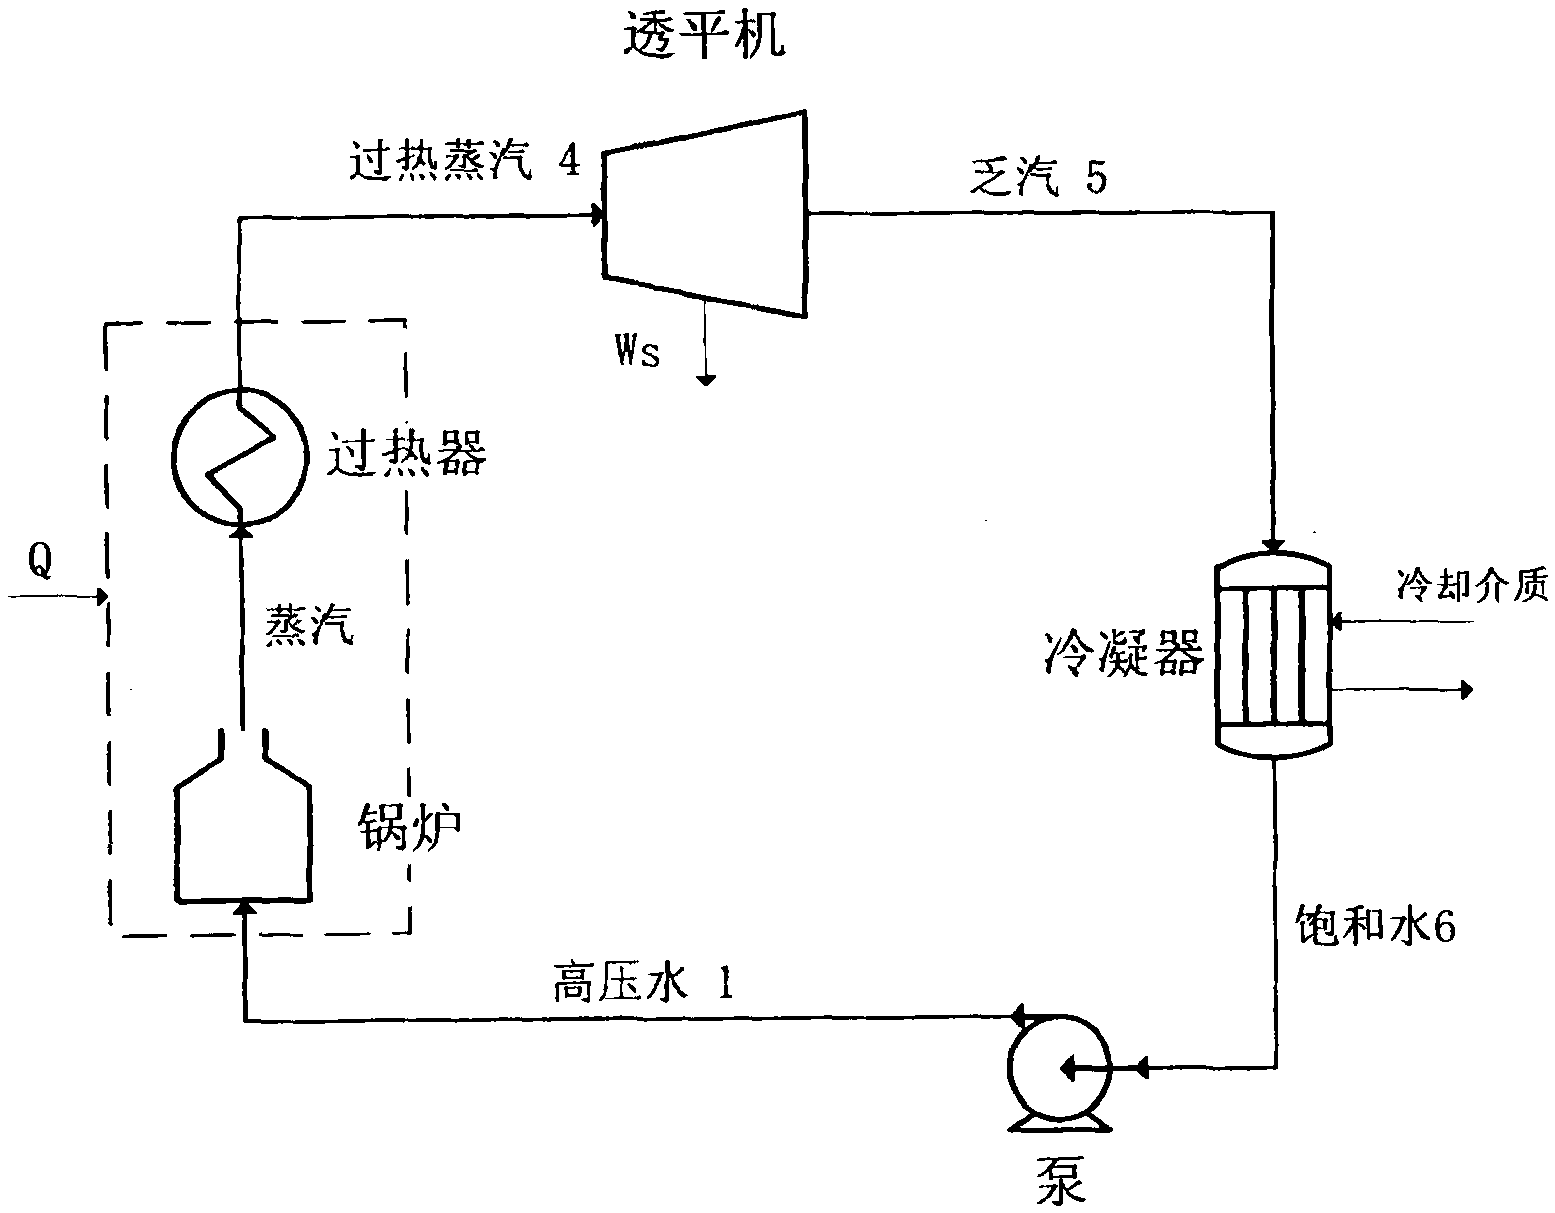 Coupling method of coal gasification process, residual carbon oxidation process and steam turbine power generation process